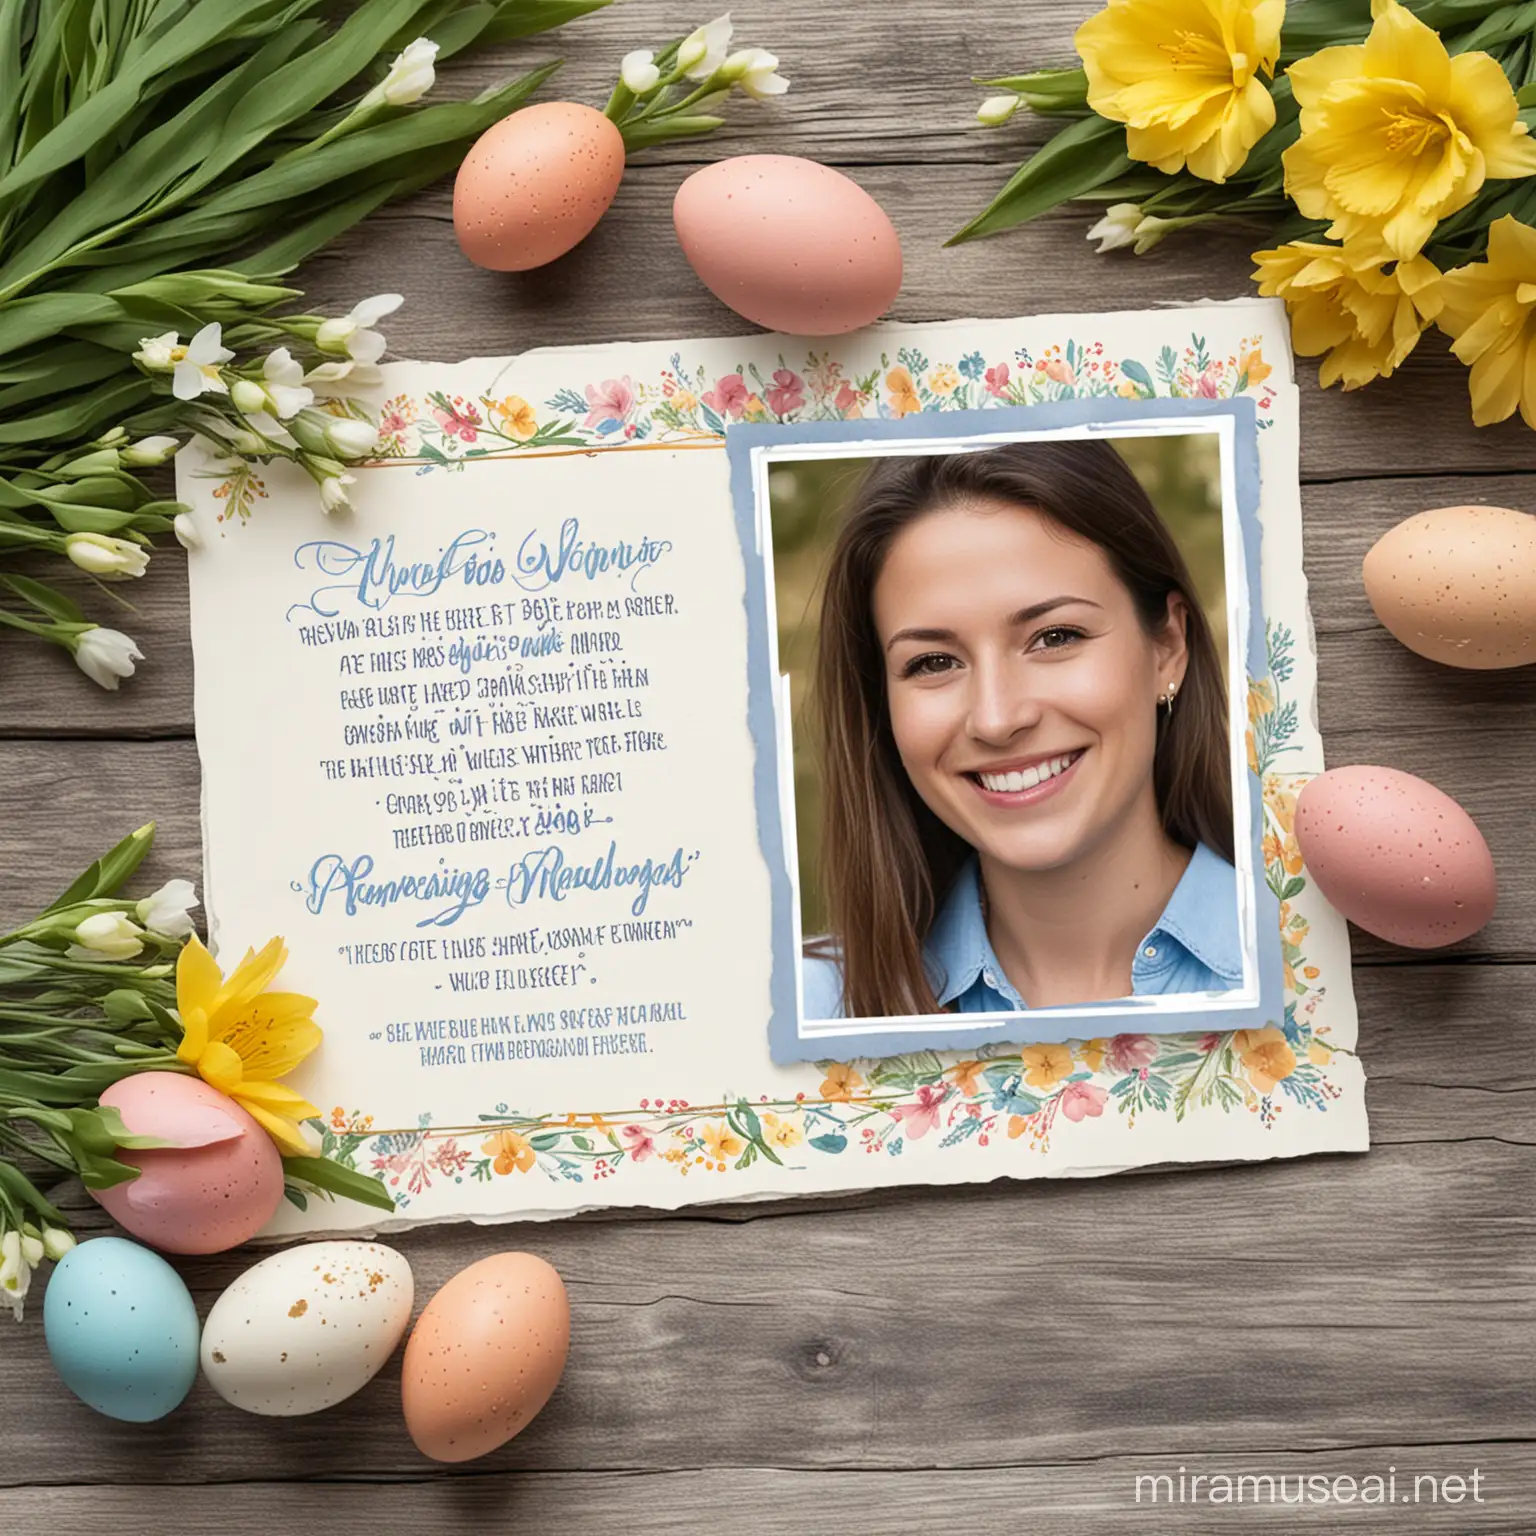 create a Facebook graphic with the ad copy "Remembering the loved ones who are not here this Easter"